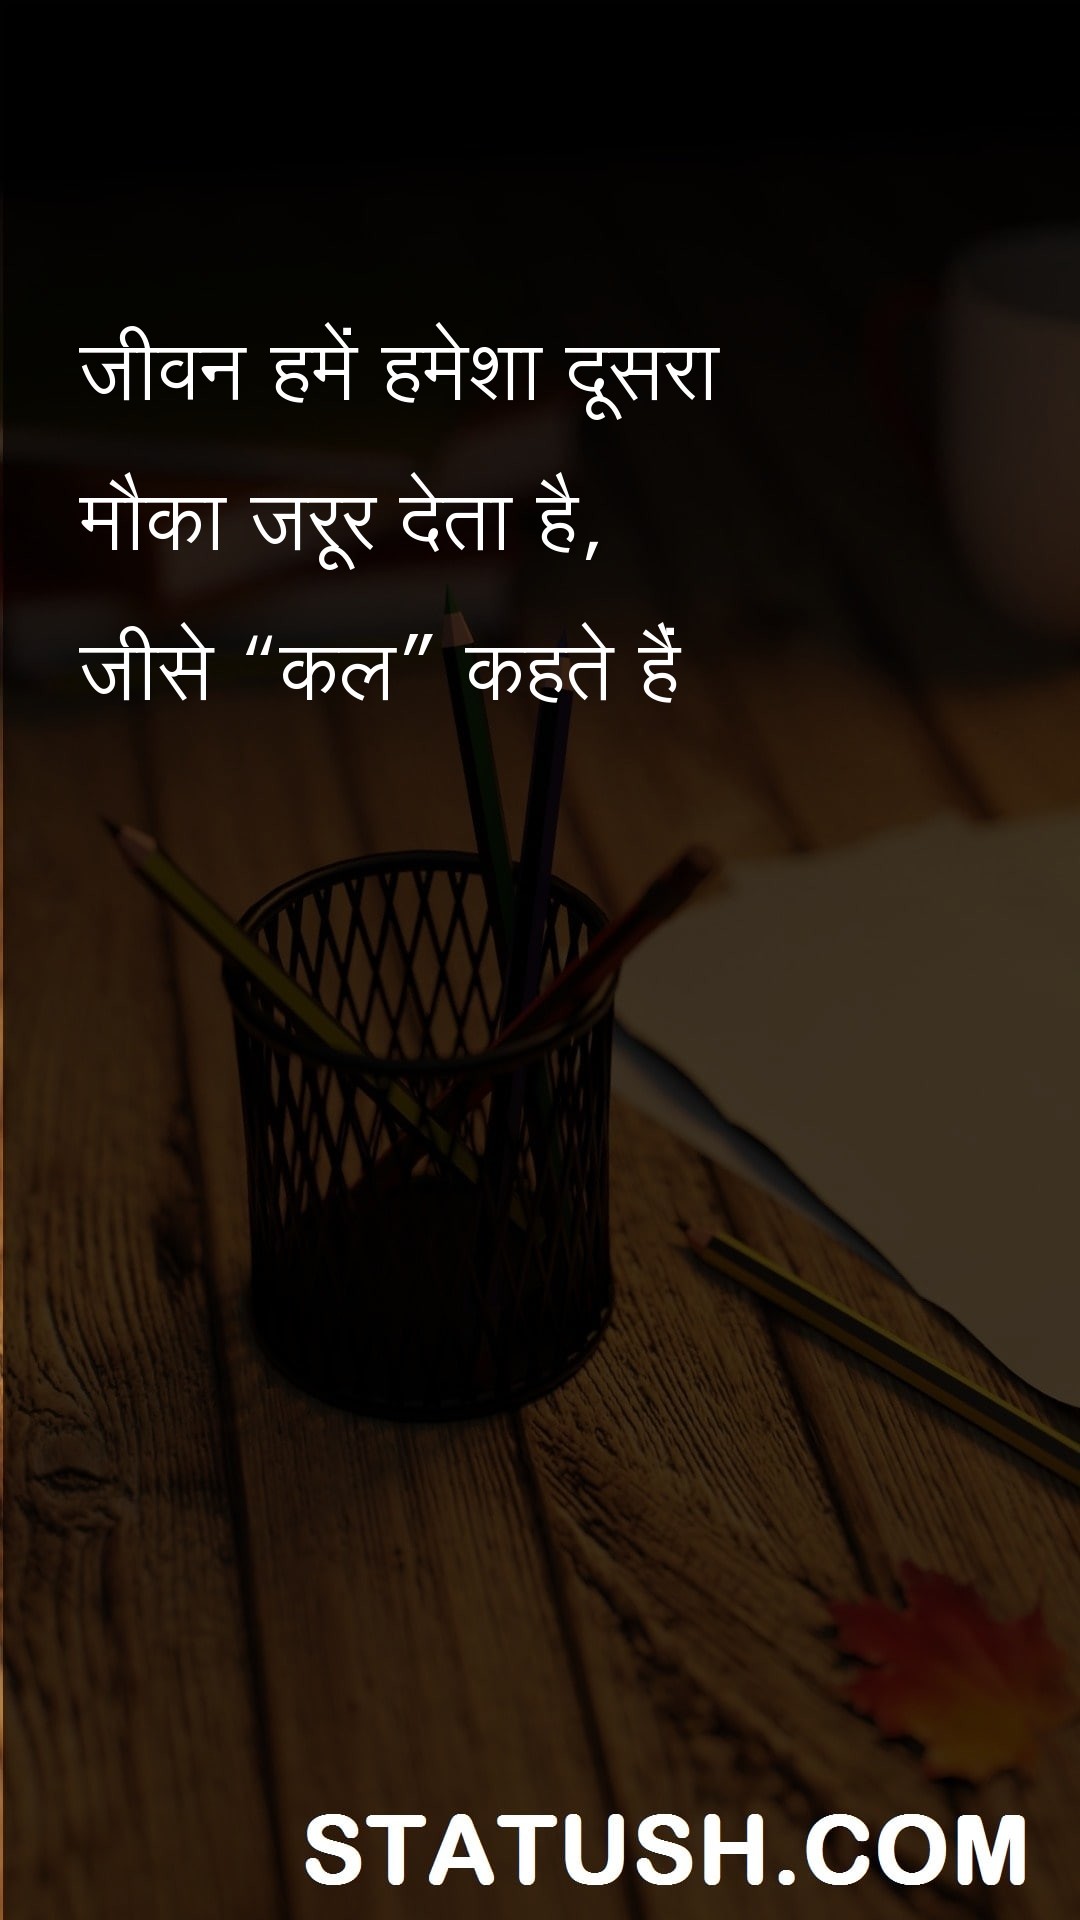 Life always gives us a second chance - Hindi Quotes at statush.com